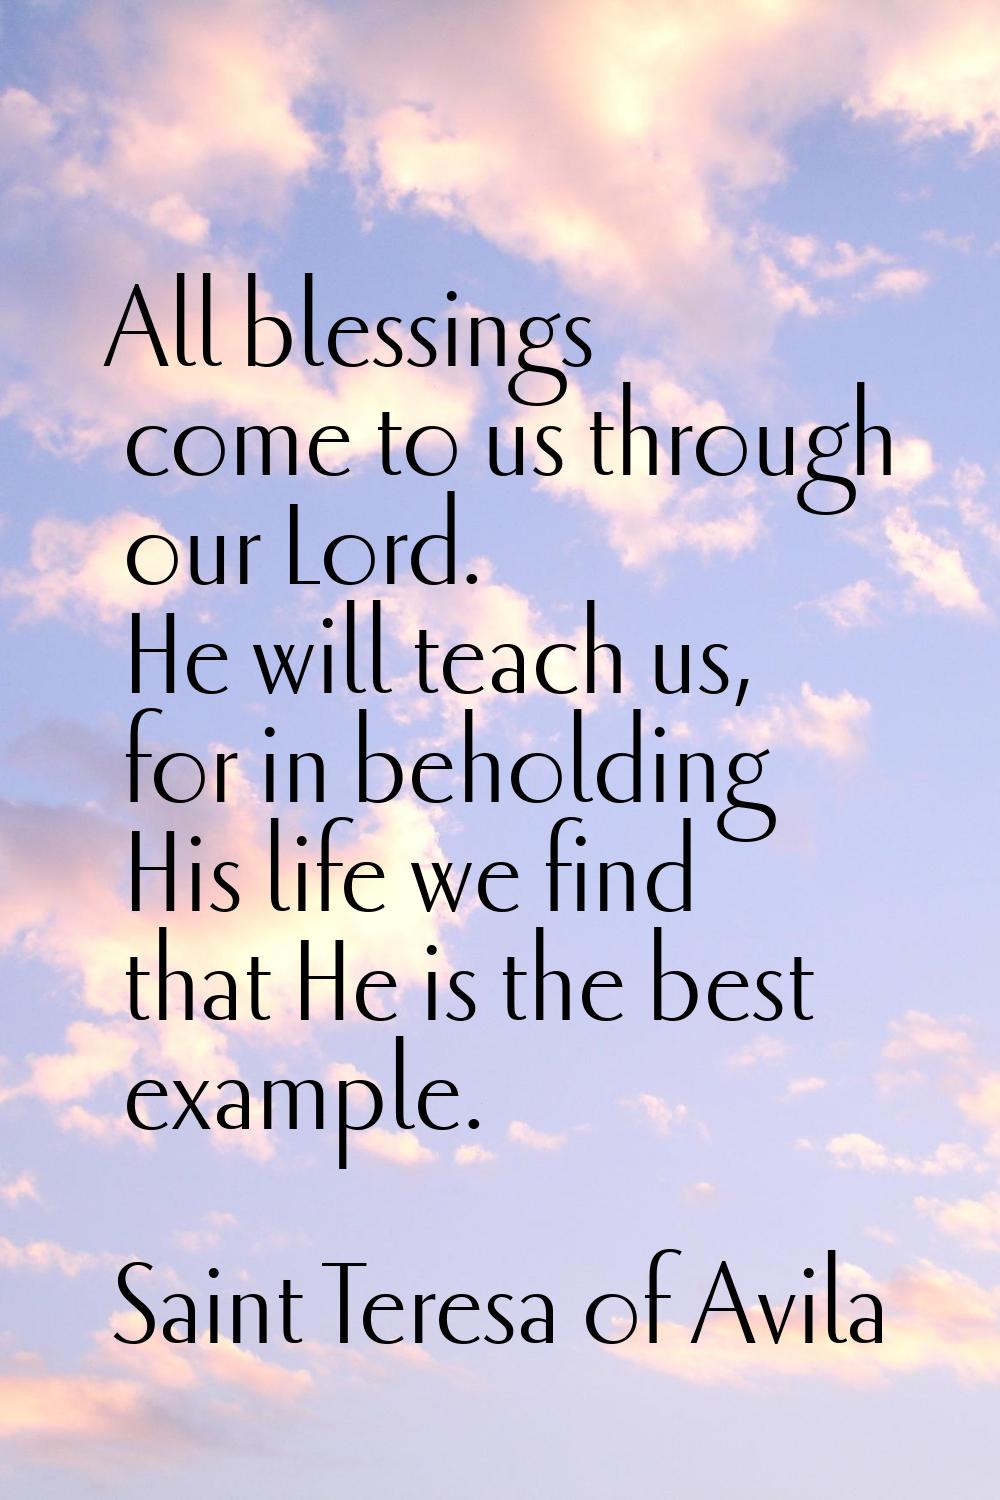 All blessings come to us through our Lord. He will teach us, for in beholding His life we find that